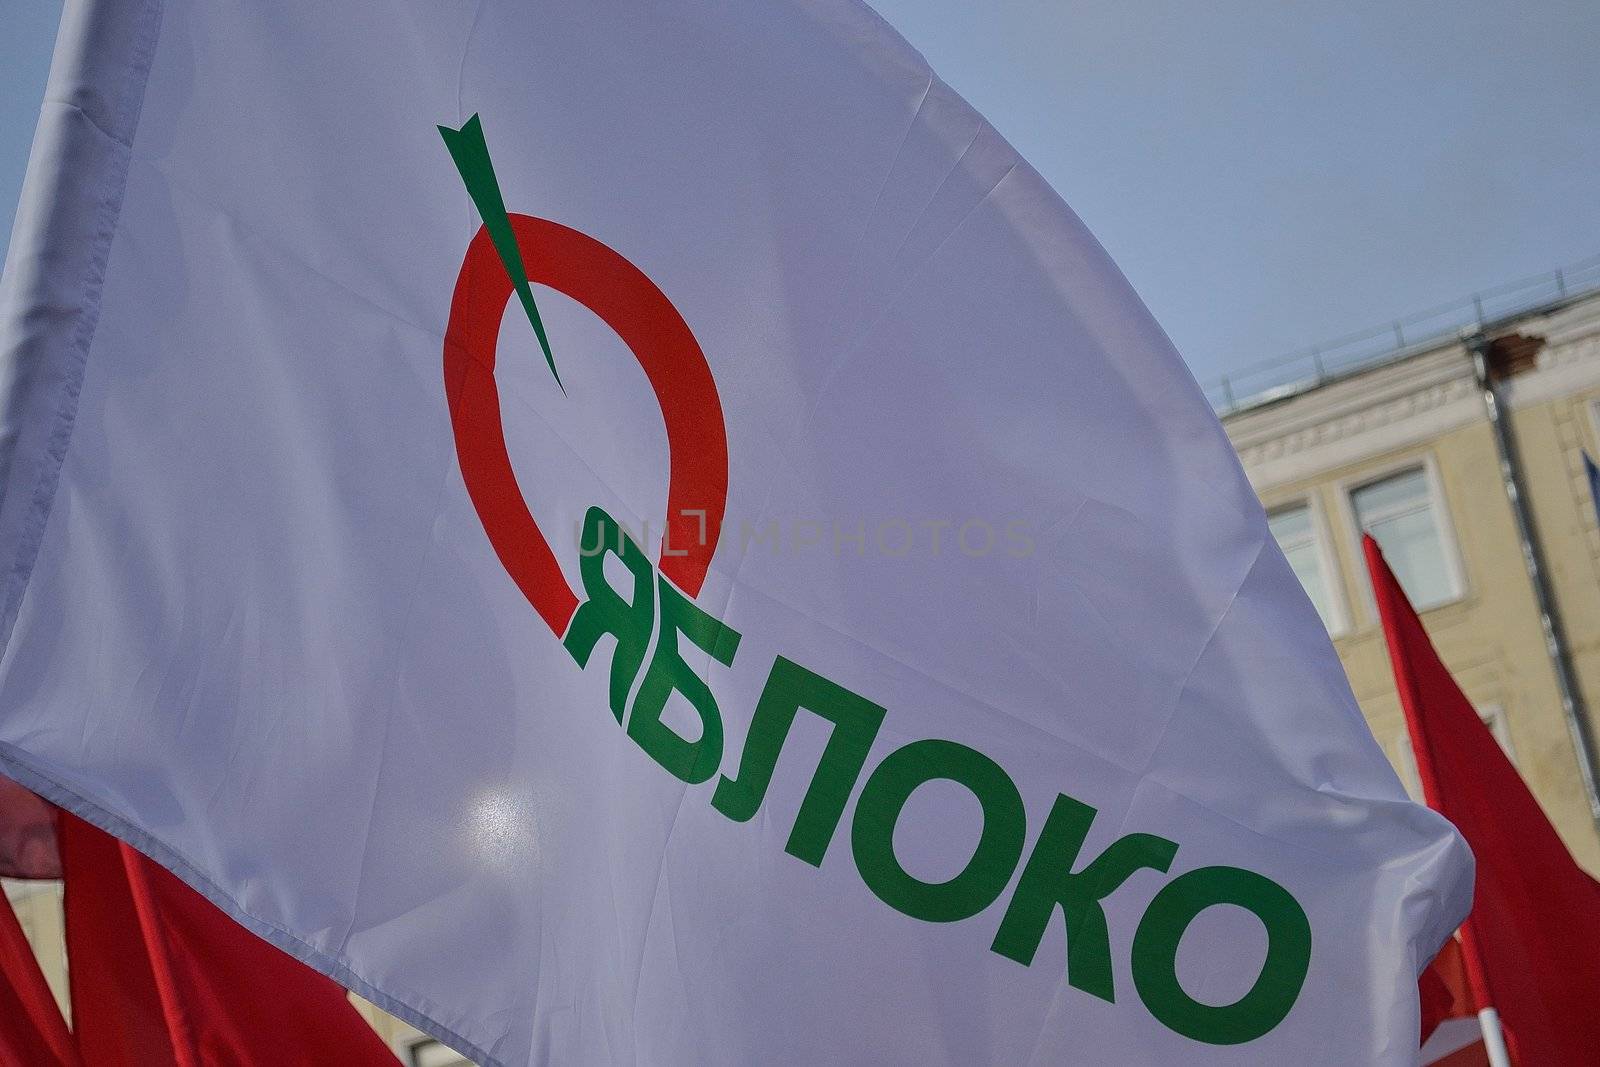 Waving flag of Russian Democratic Party on the Bolotnaya Square in time of processing against fair elections